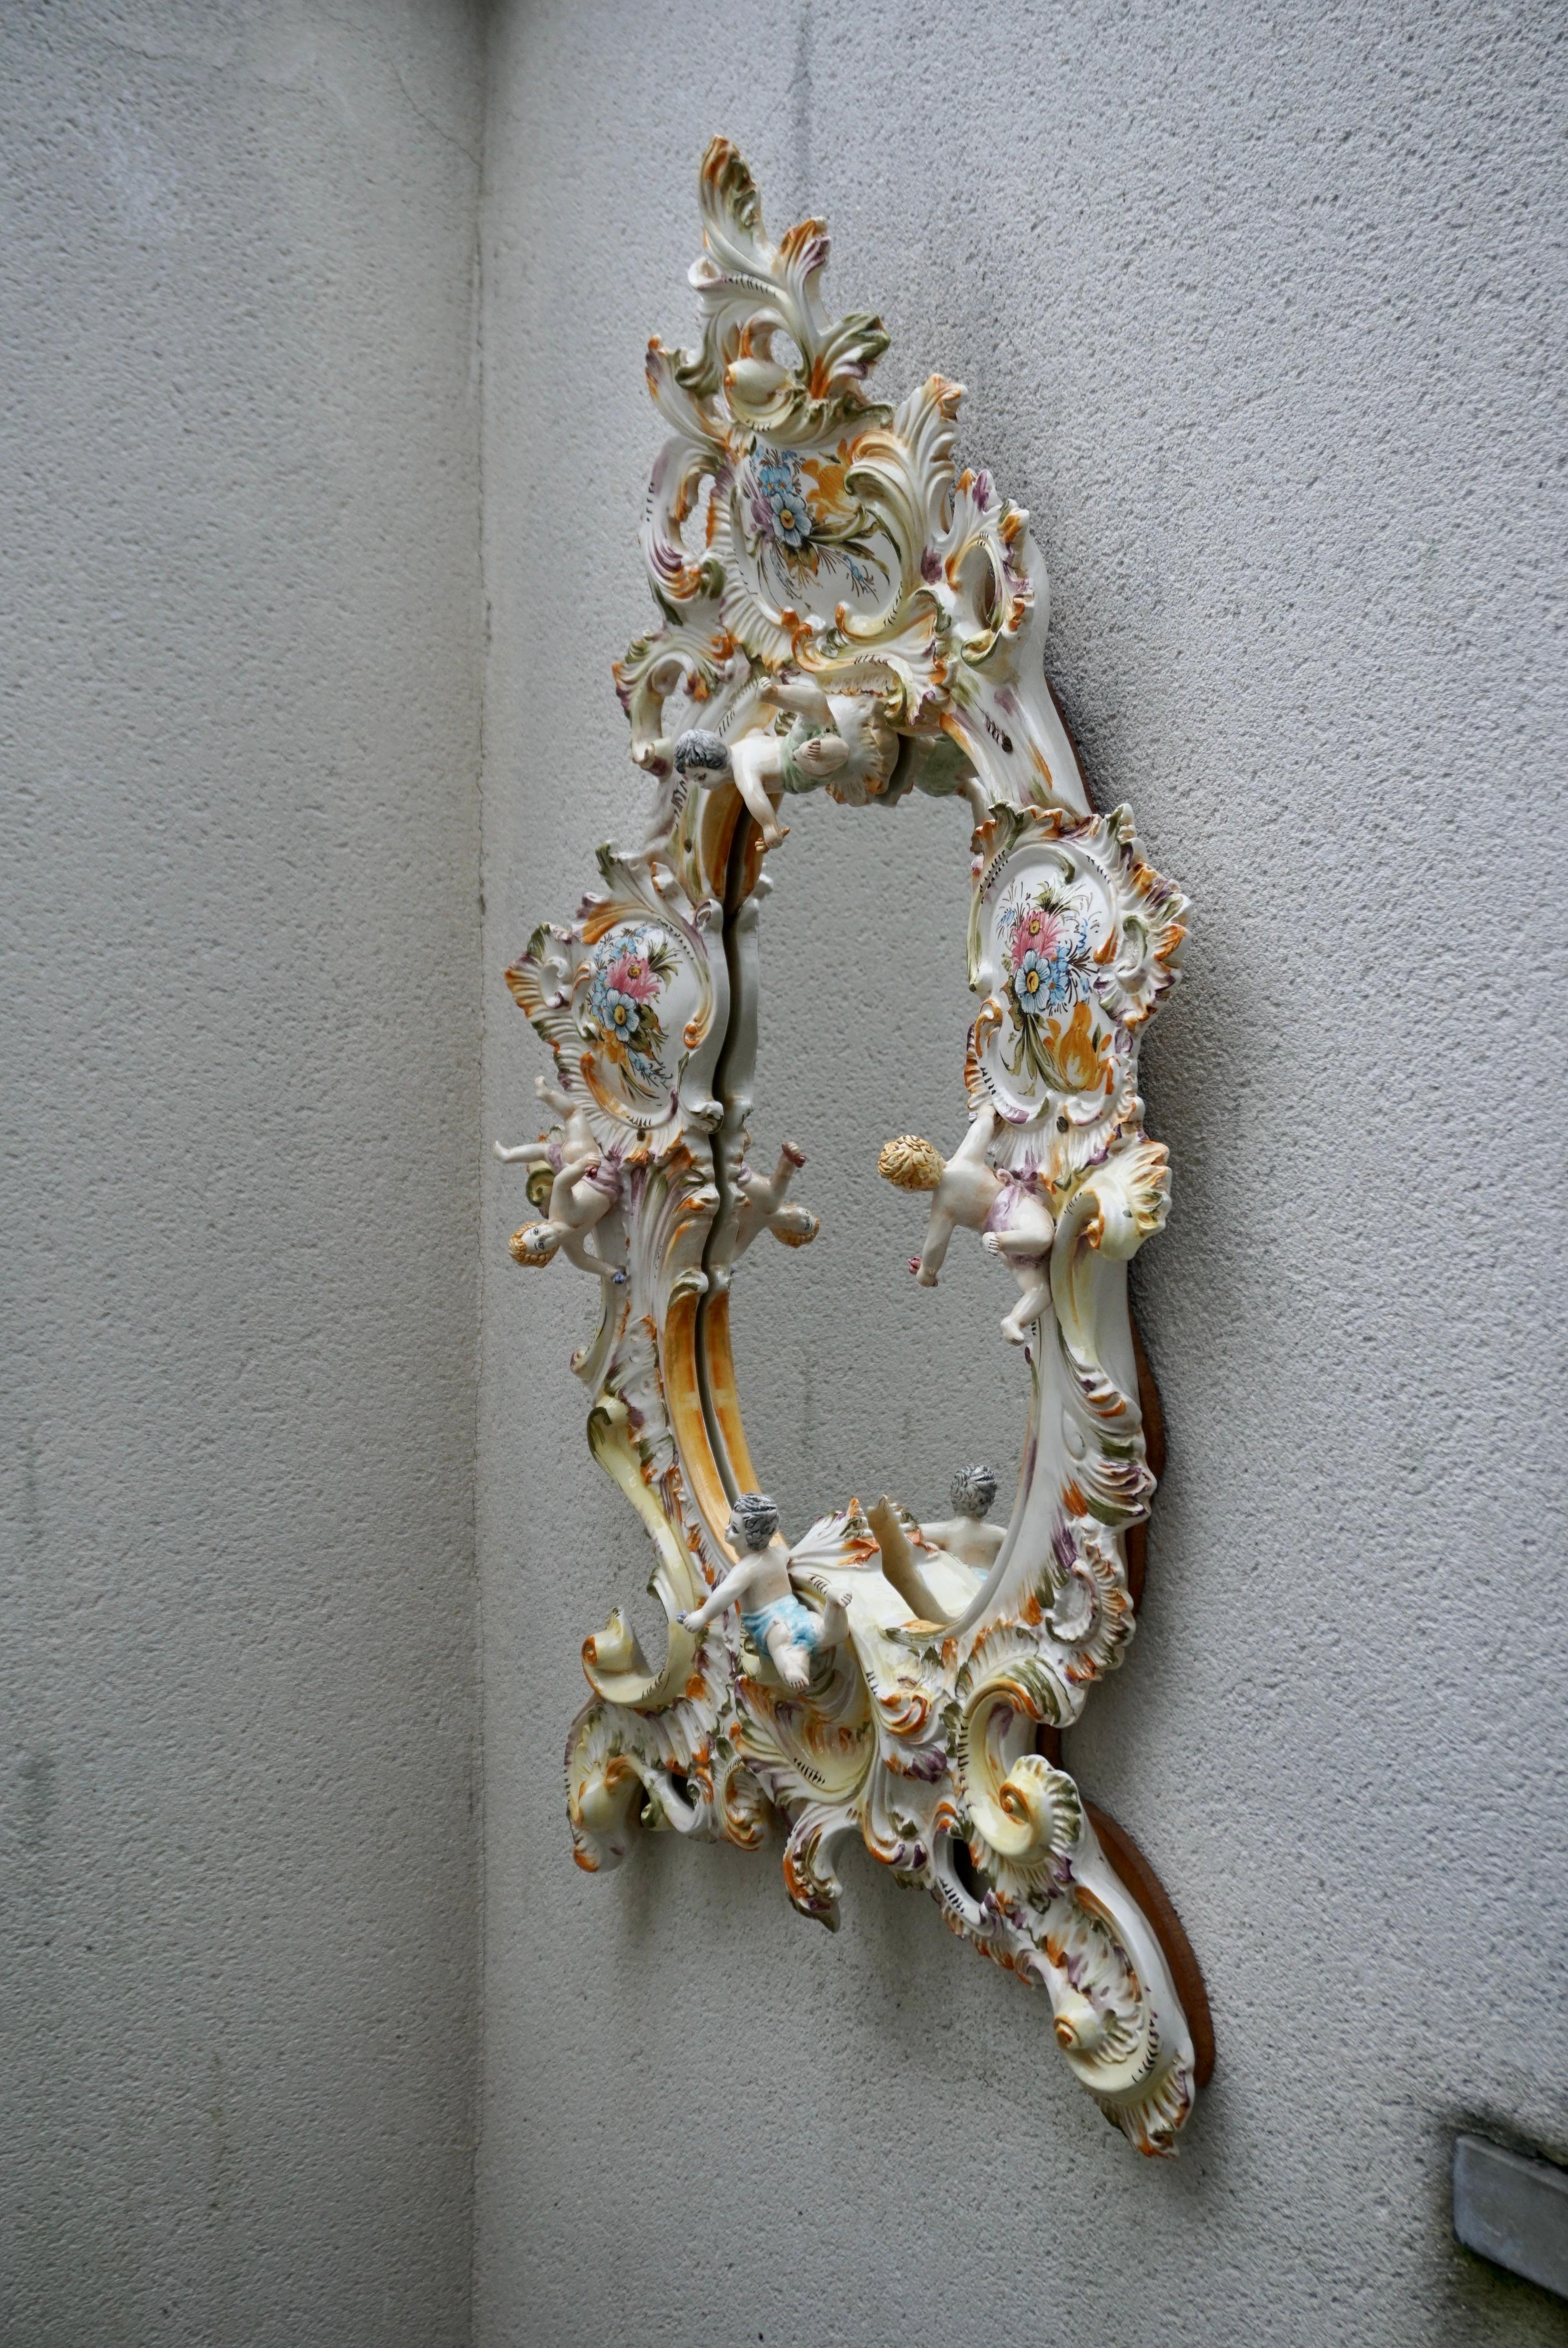 Mid-20th Century Italian Capodimonte Porcelain Mirror with Flowers and Cherubs For Sale 1